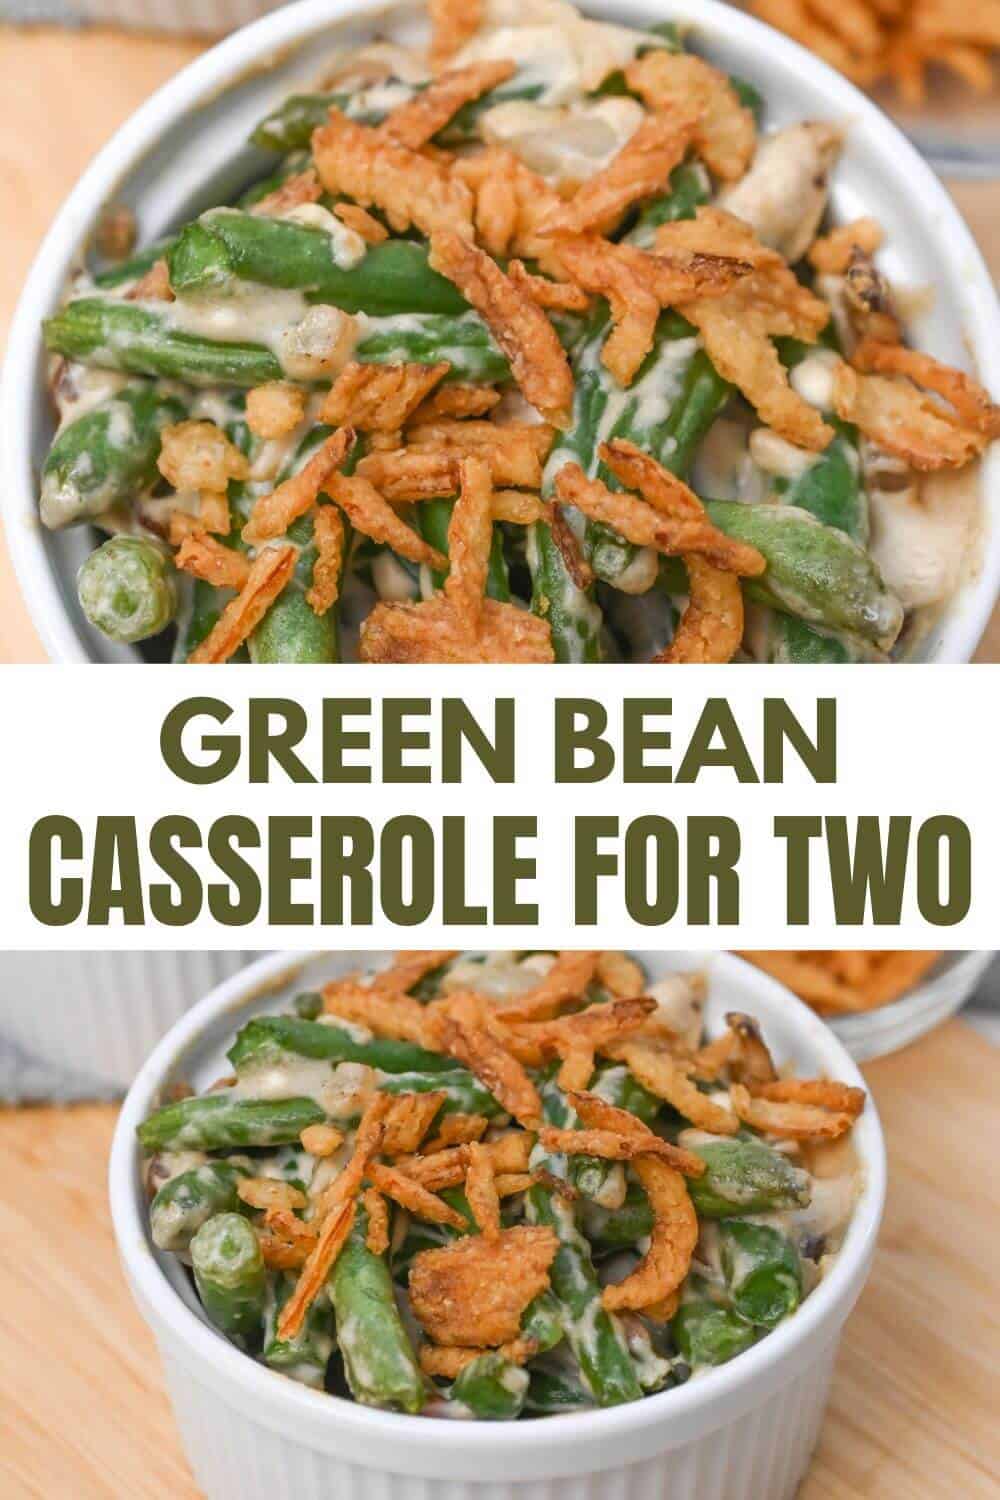 Green bean casserole for two.